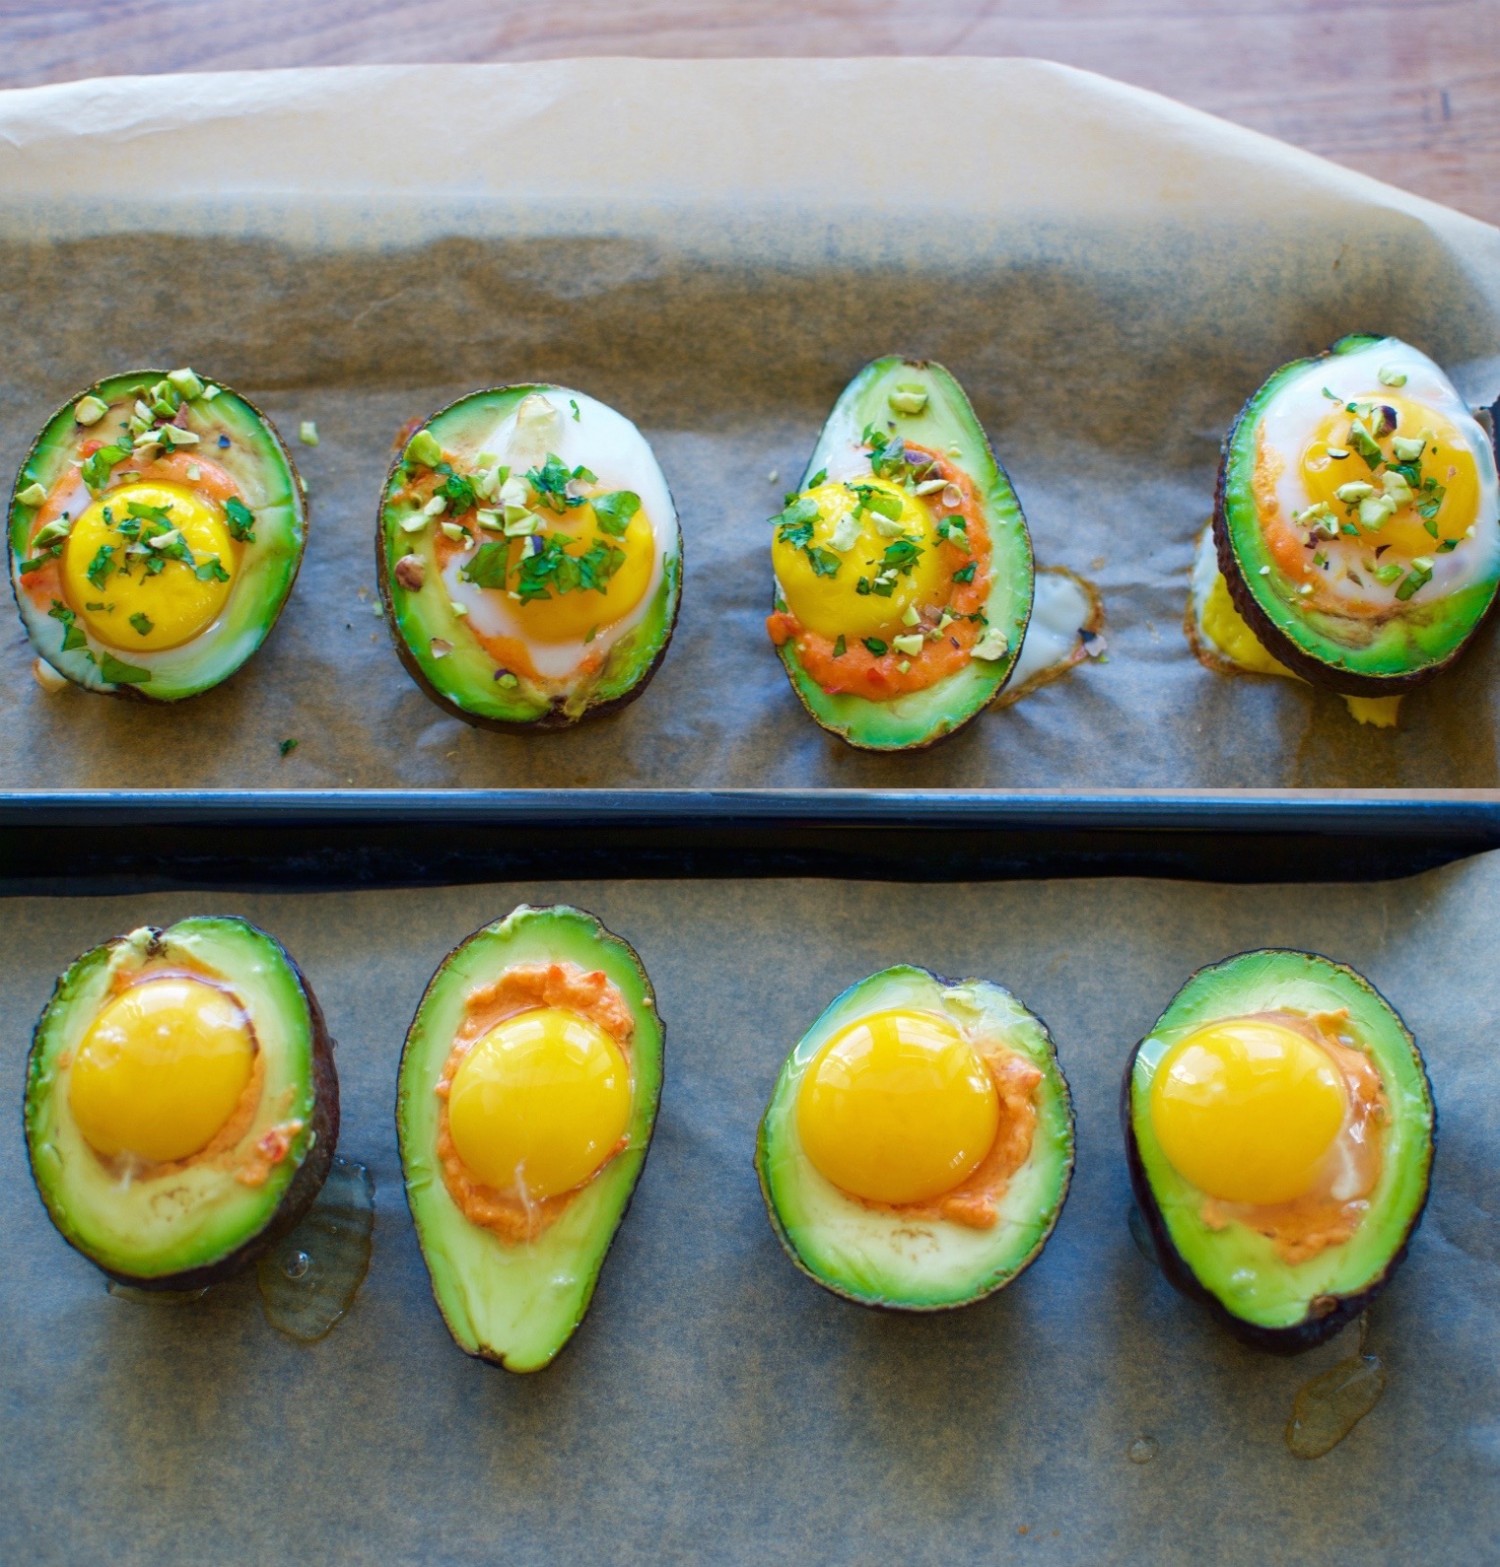 Dreamy stuffed and baked avocados